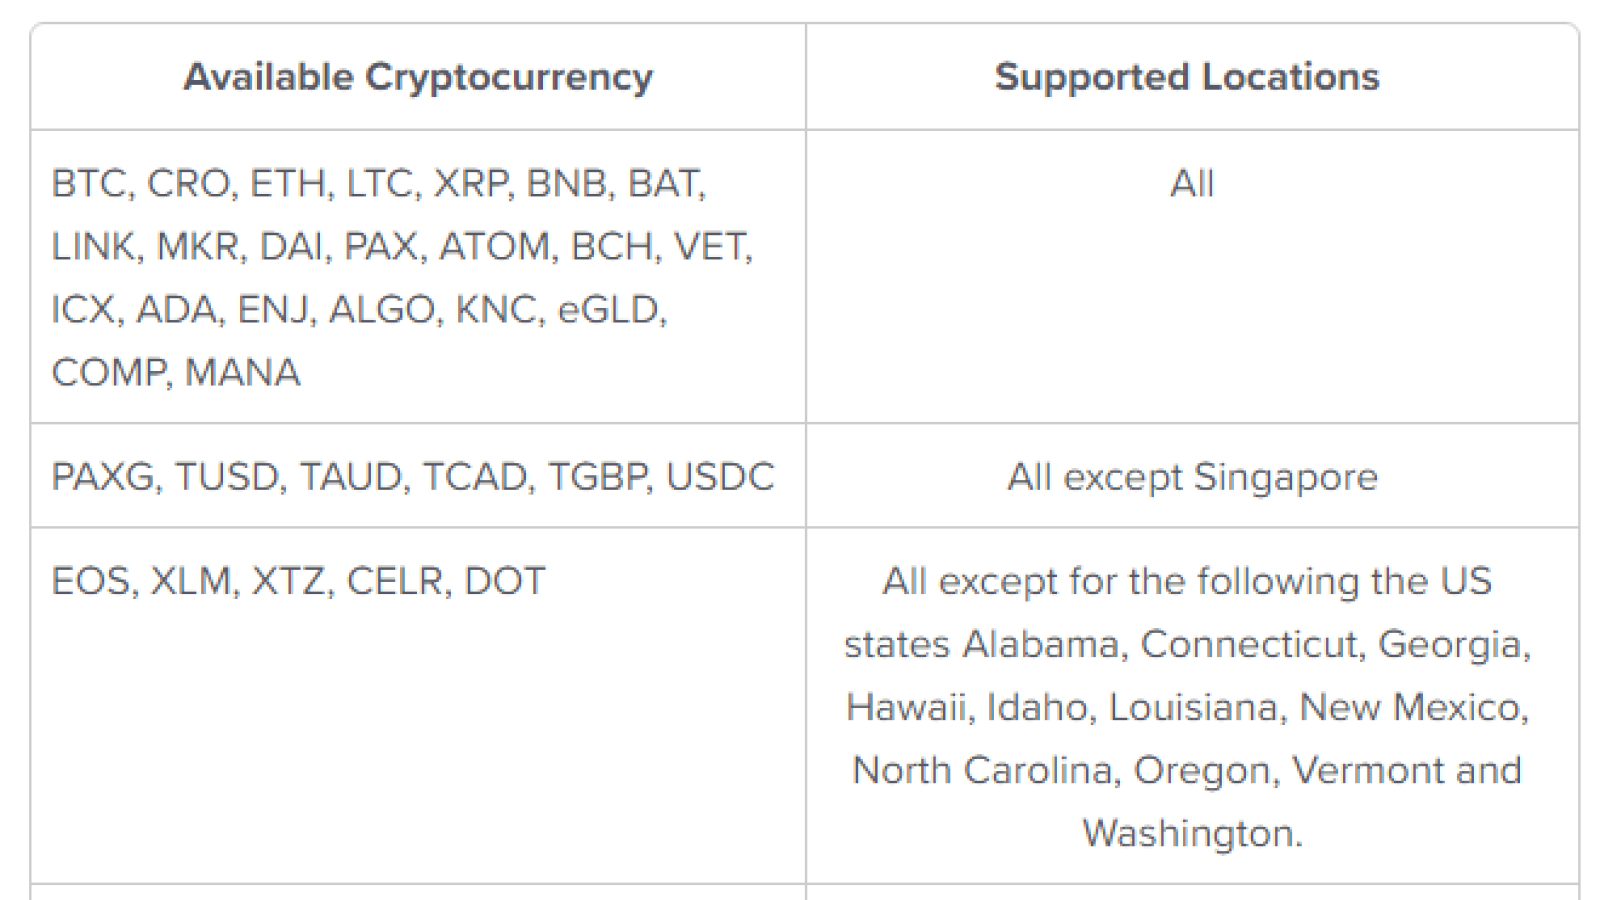 Double-check the availability of the “Crypto Earn” service in your state or region // Image by Crypto.com